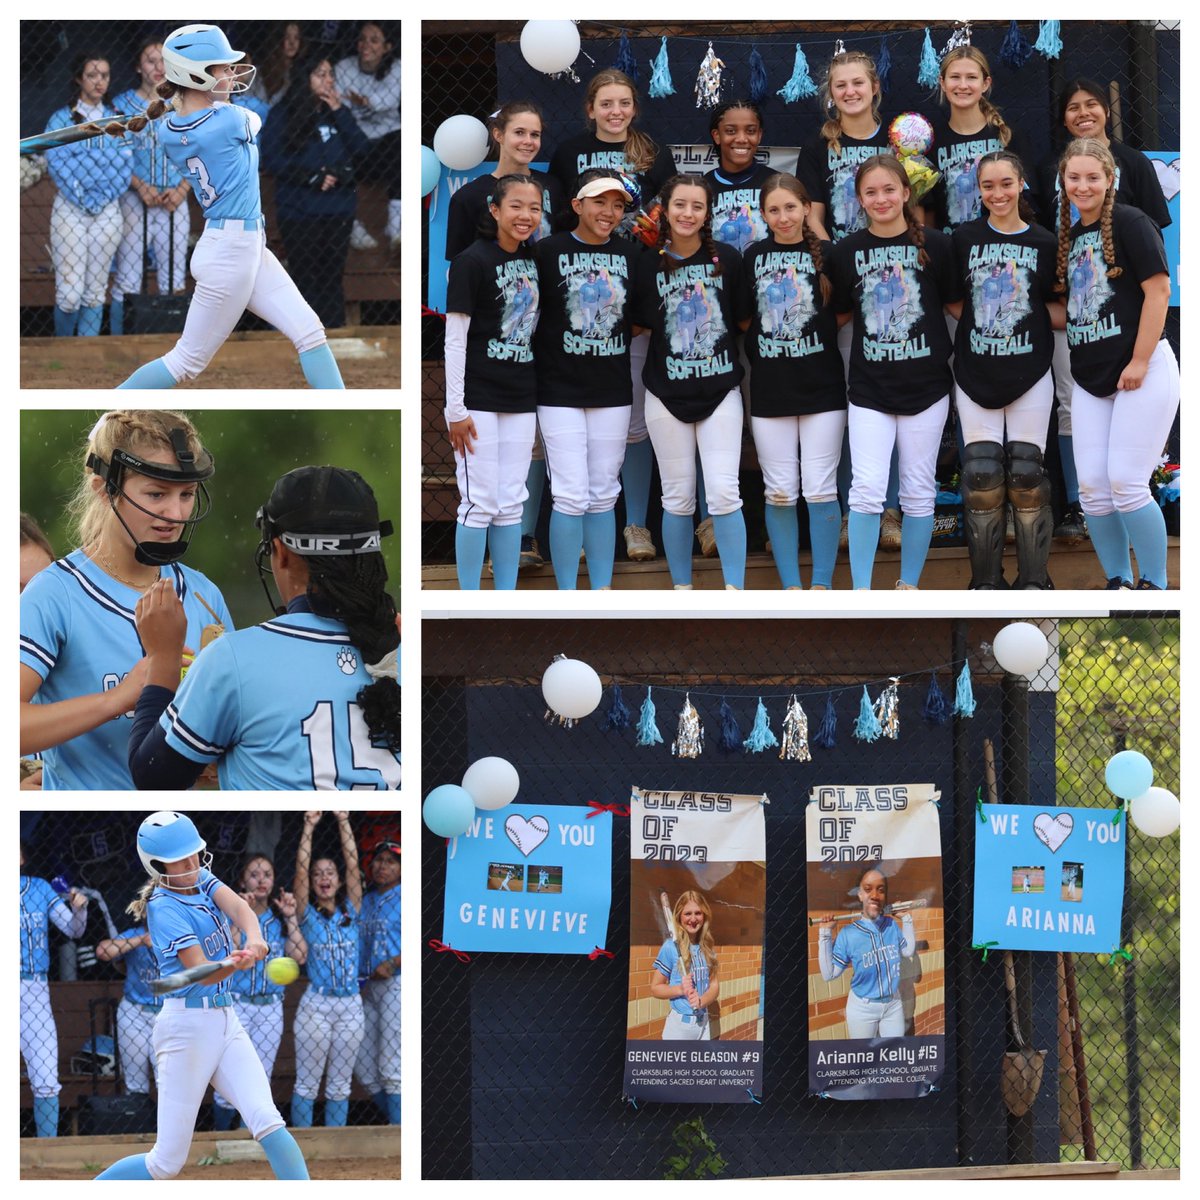 Late post. Busy week. Let’s catch u up…. 1. Defeated defending 4A state champs 2. Celebrated senior night with a 9-0, no hit, shut out! 🚫 3. This weeks @WTOP player of the week is our own senior Genevieve Gleason! The possibilities are endless and we’re on a mission! #seeusoon